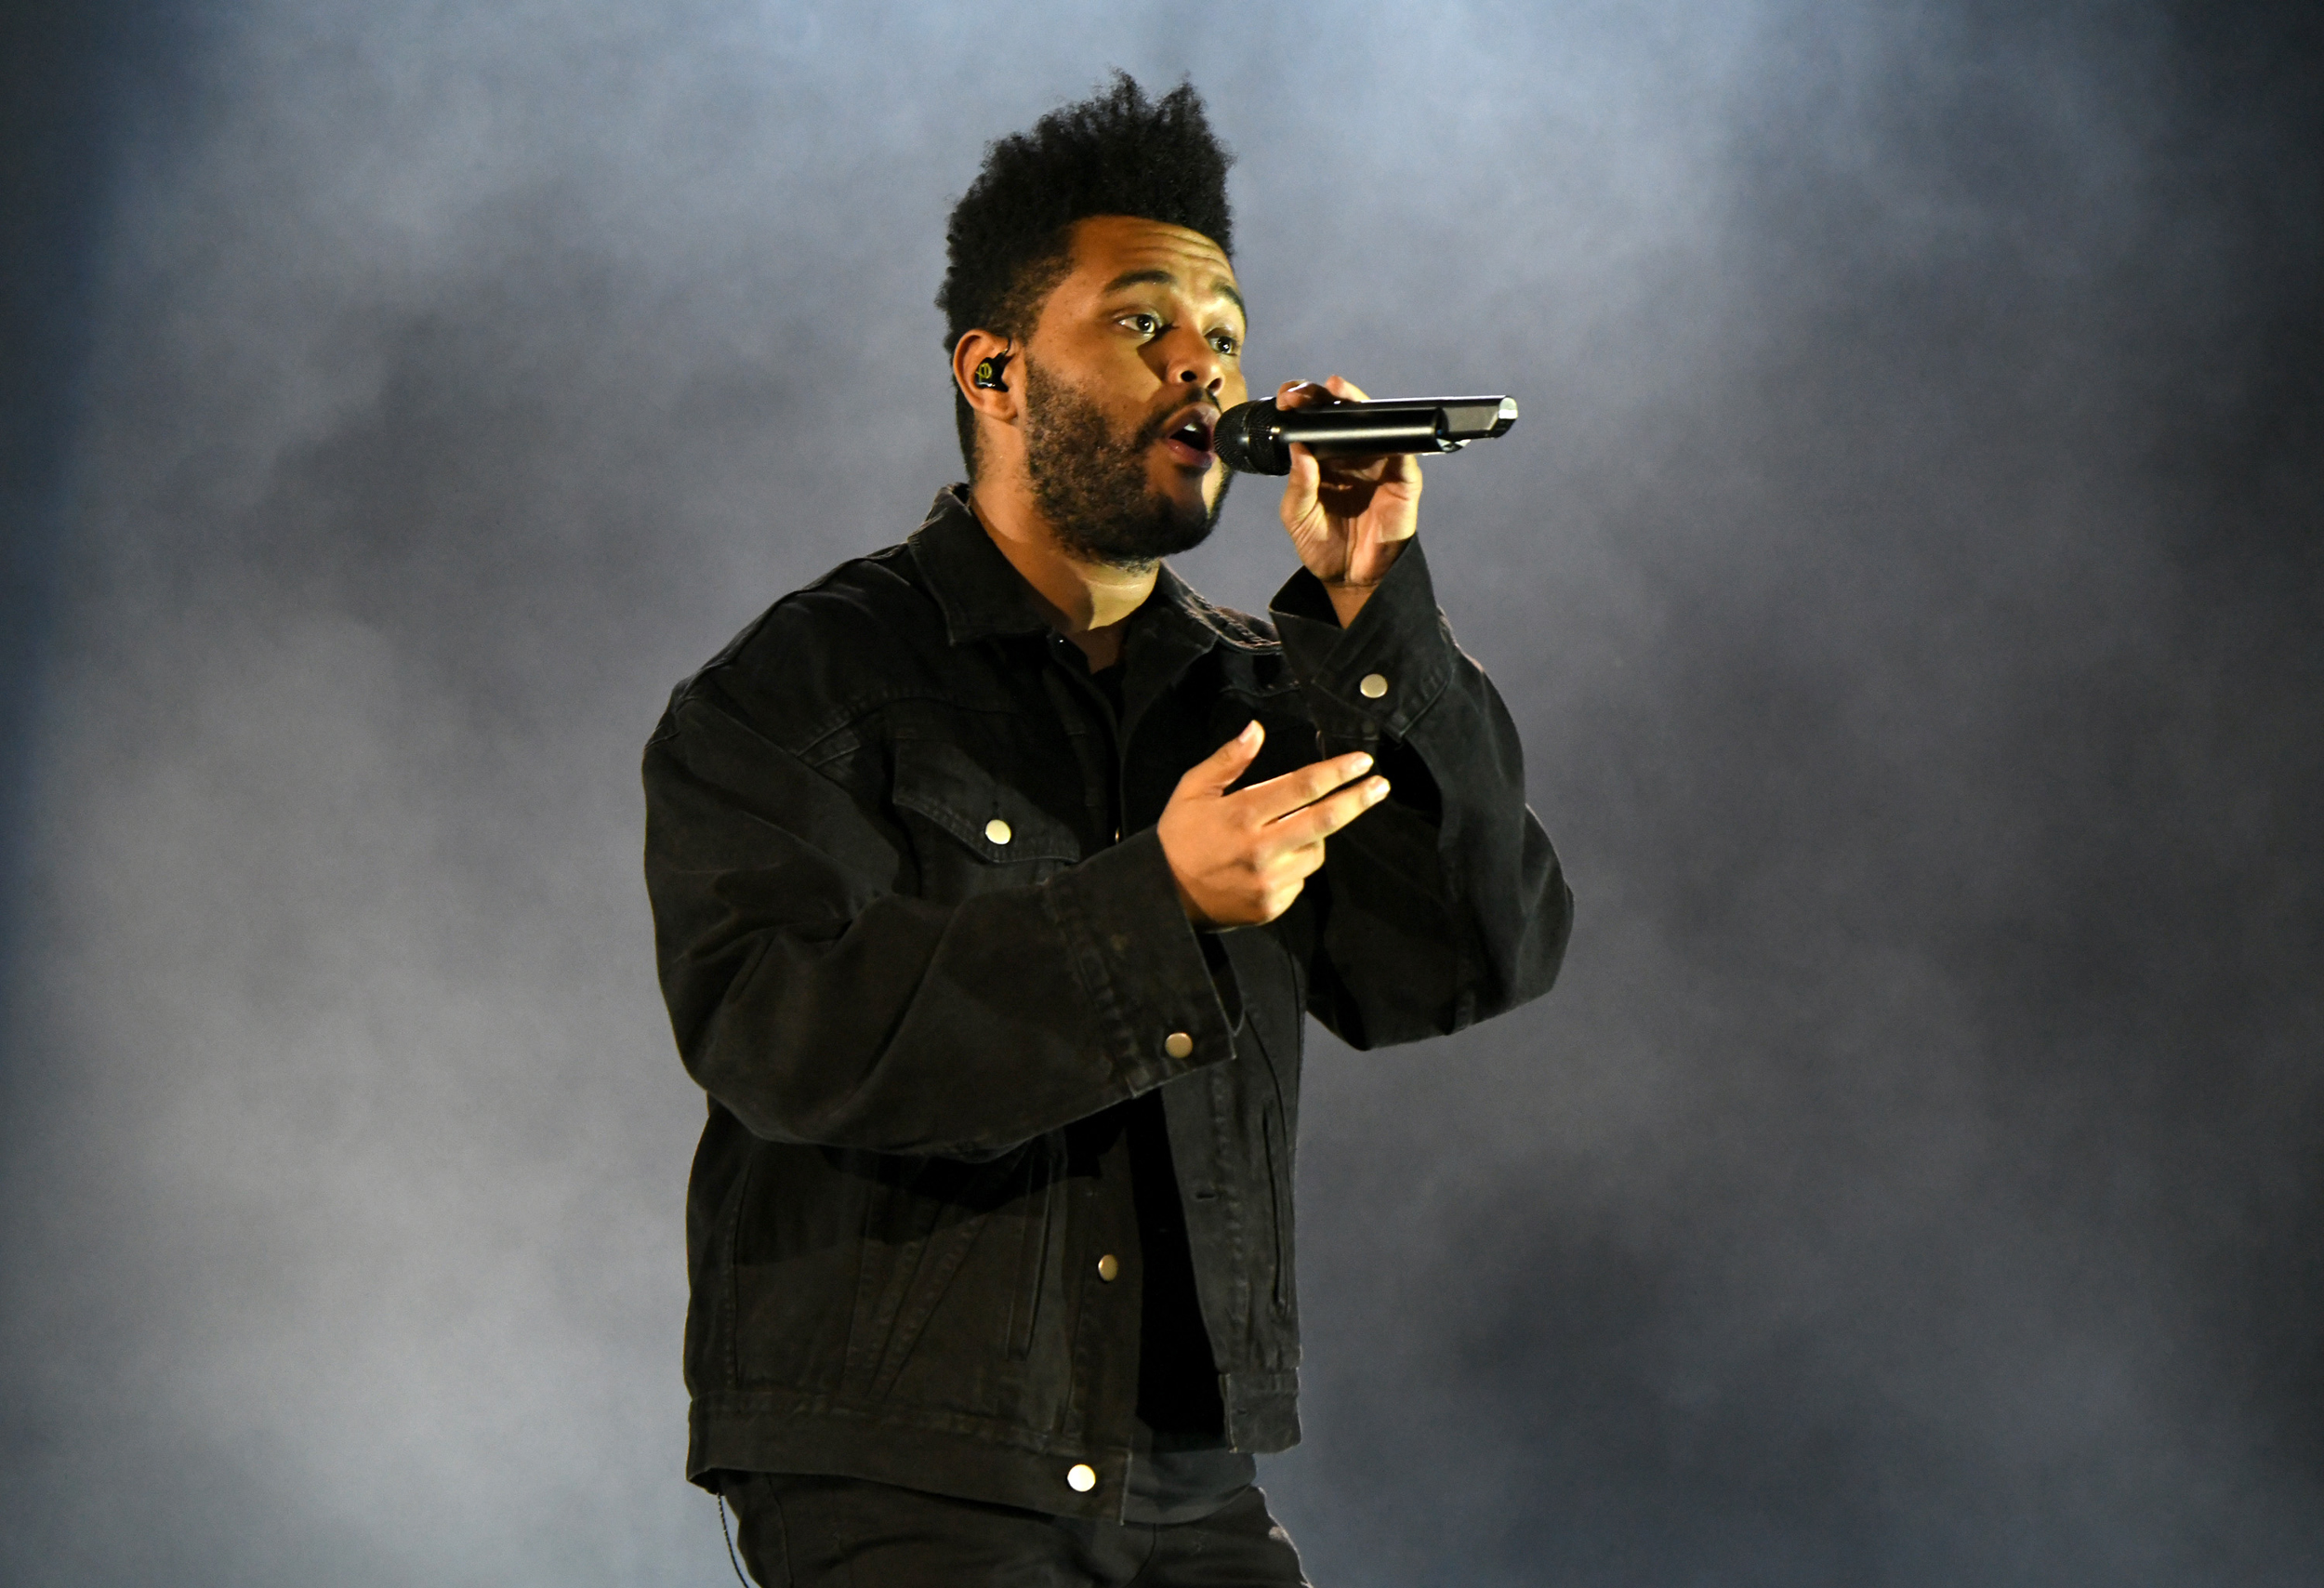 The Weeknd performs during the 2018 Global Citizen Concert, on Sept. 29, 2018 in New York City.